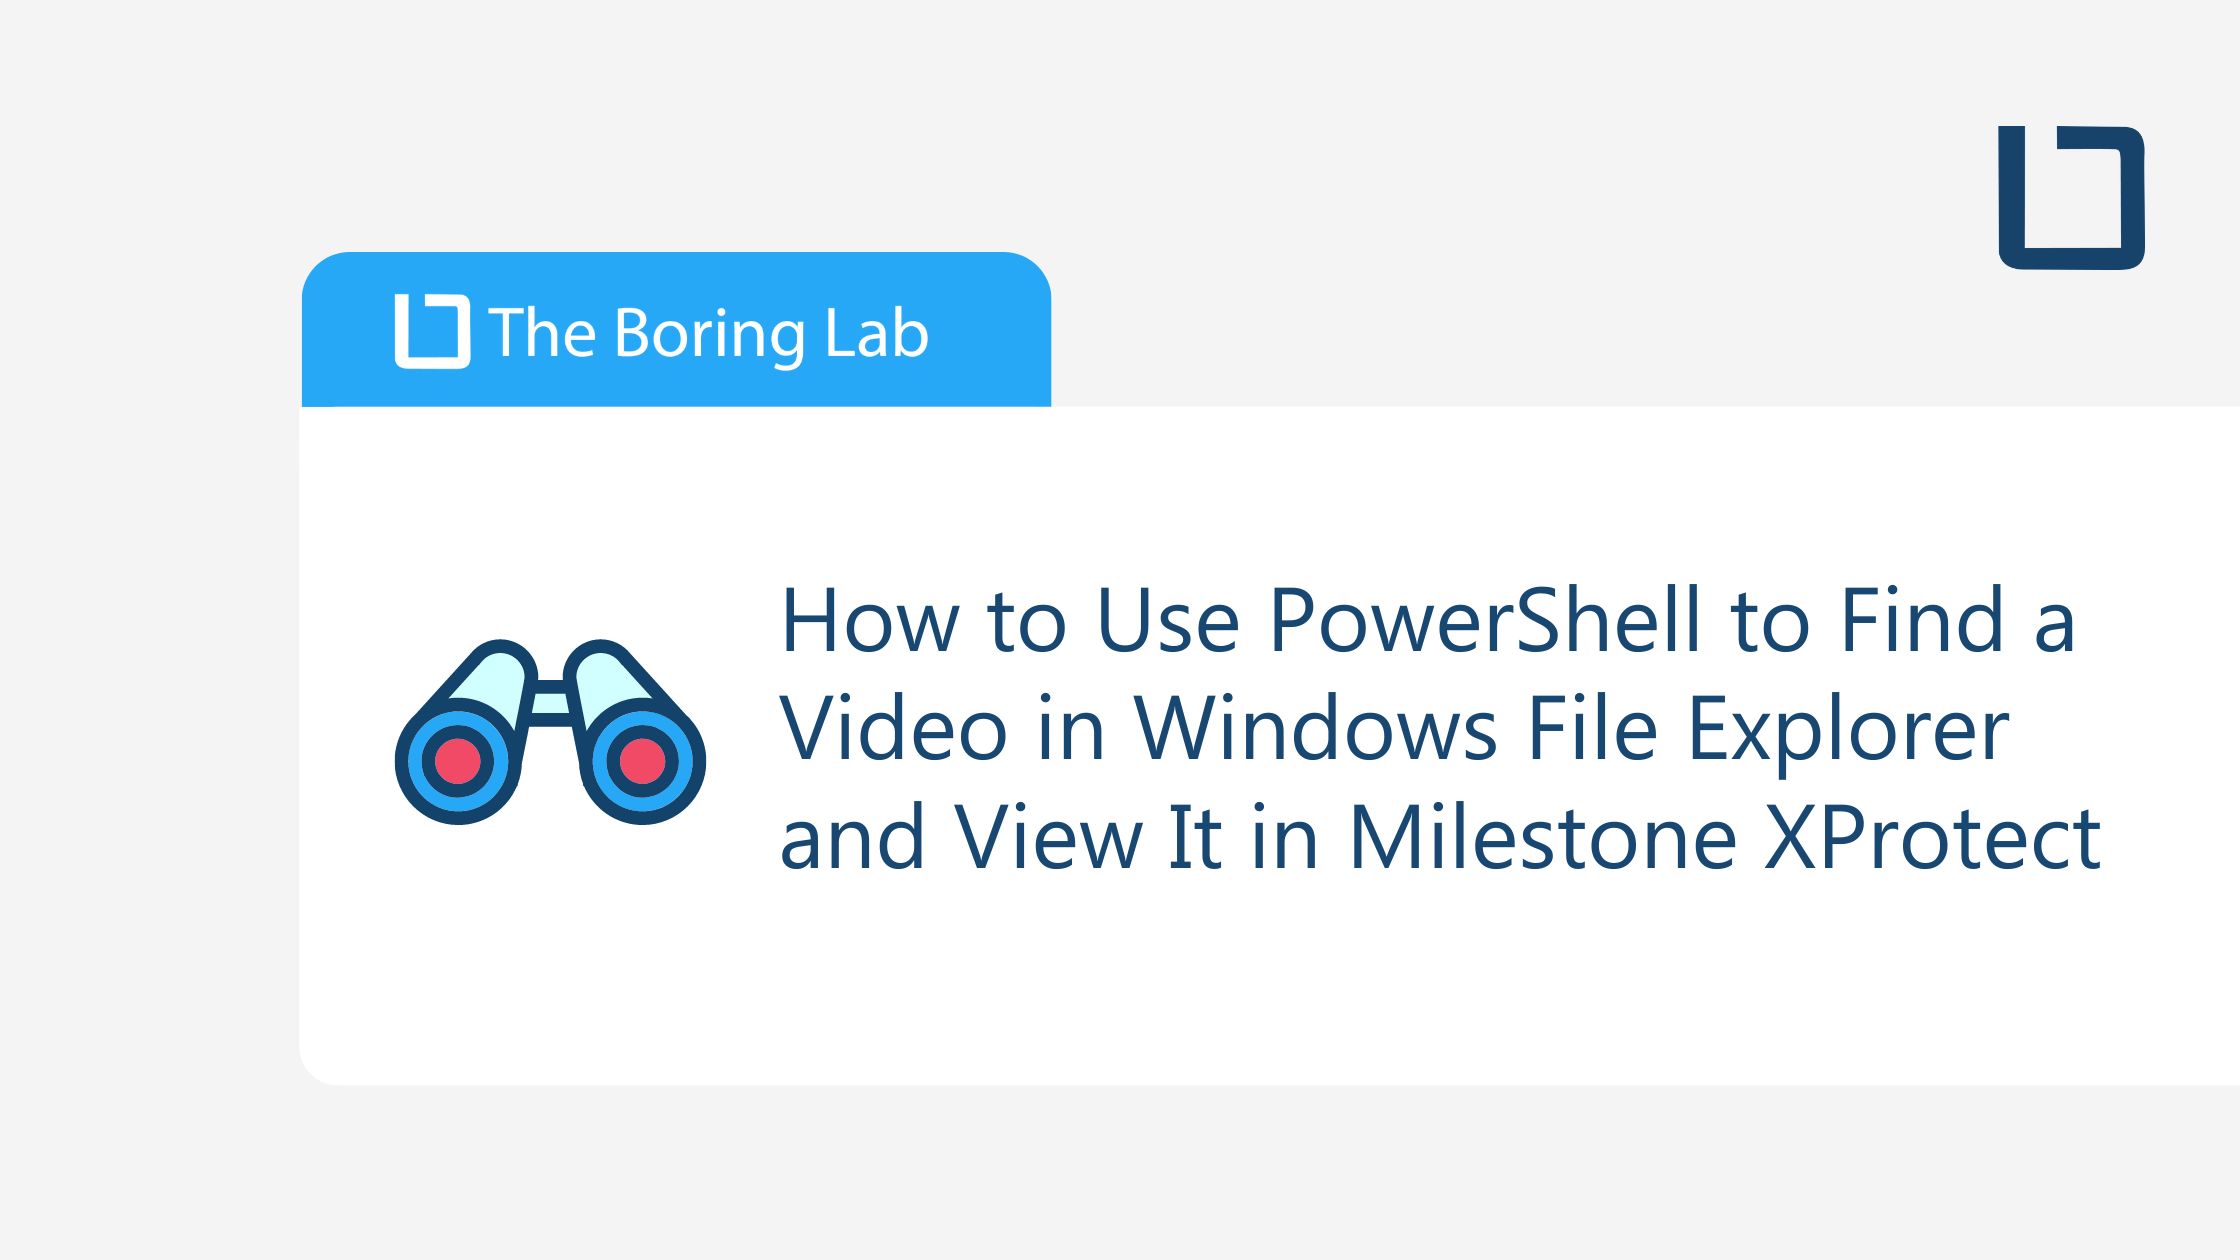 How to Use PowerShell to Find a Video in Windows File Explorer and View It in Milestone XProtect